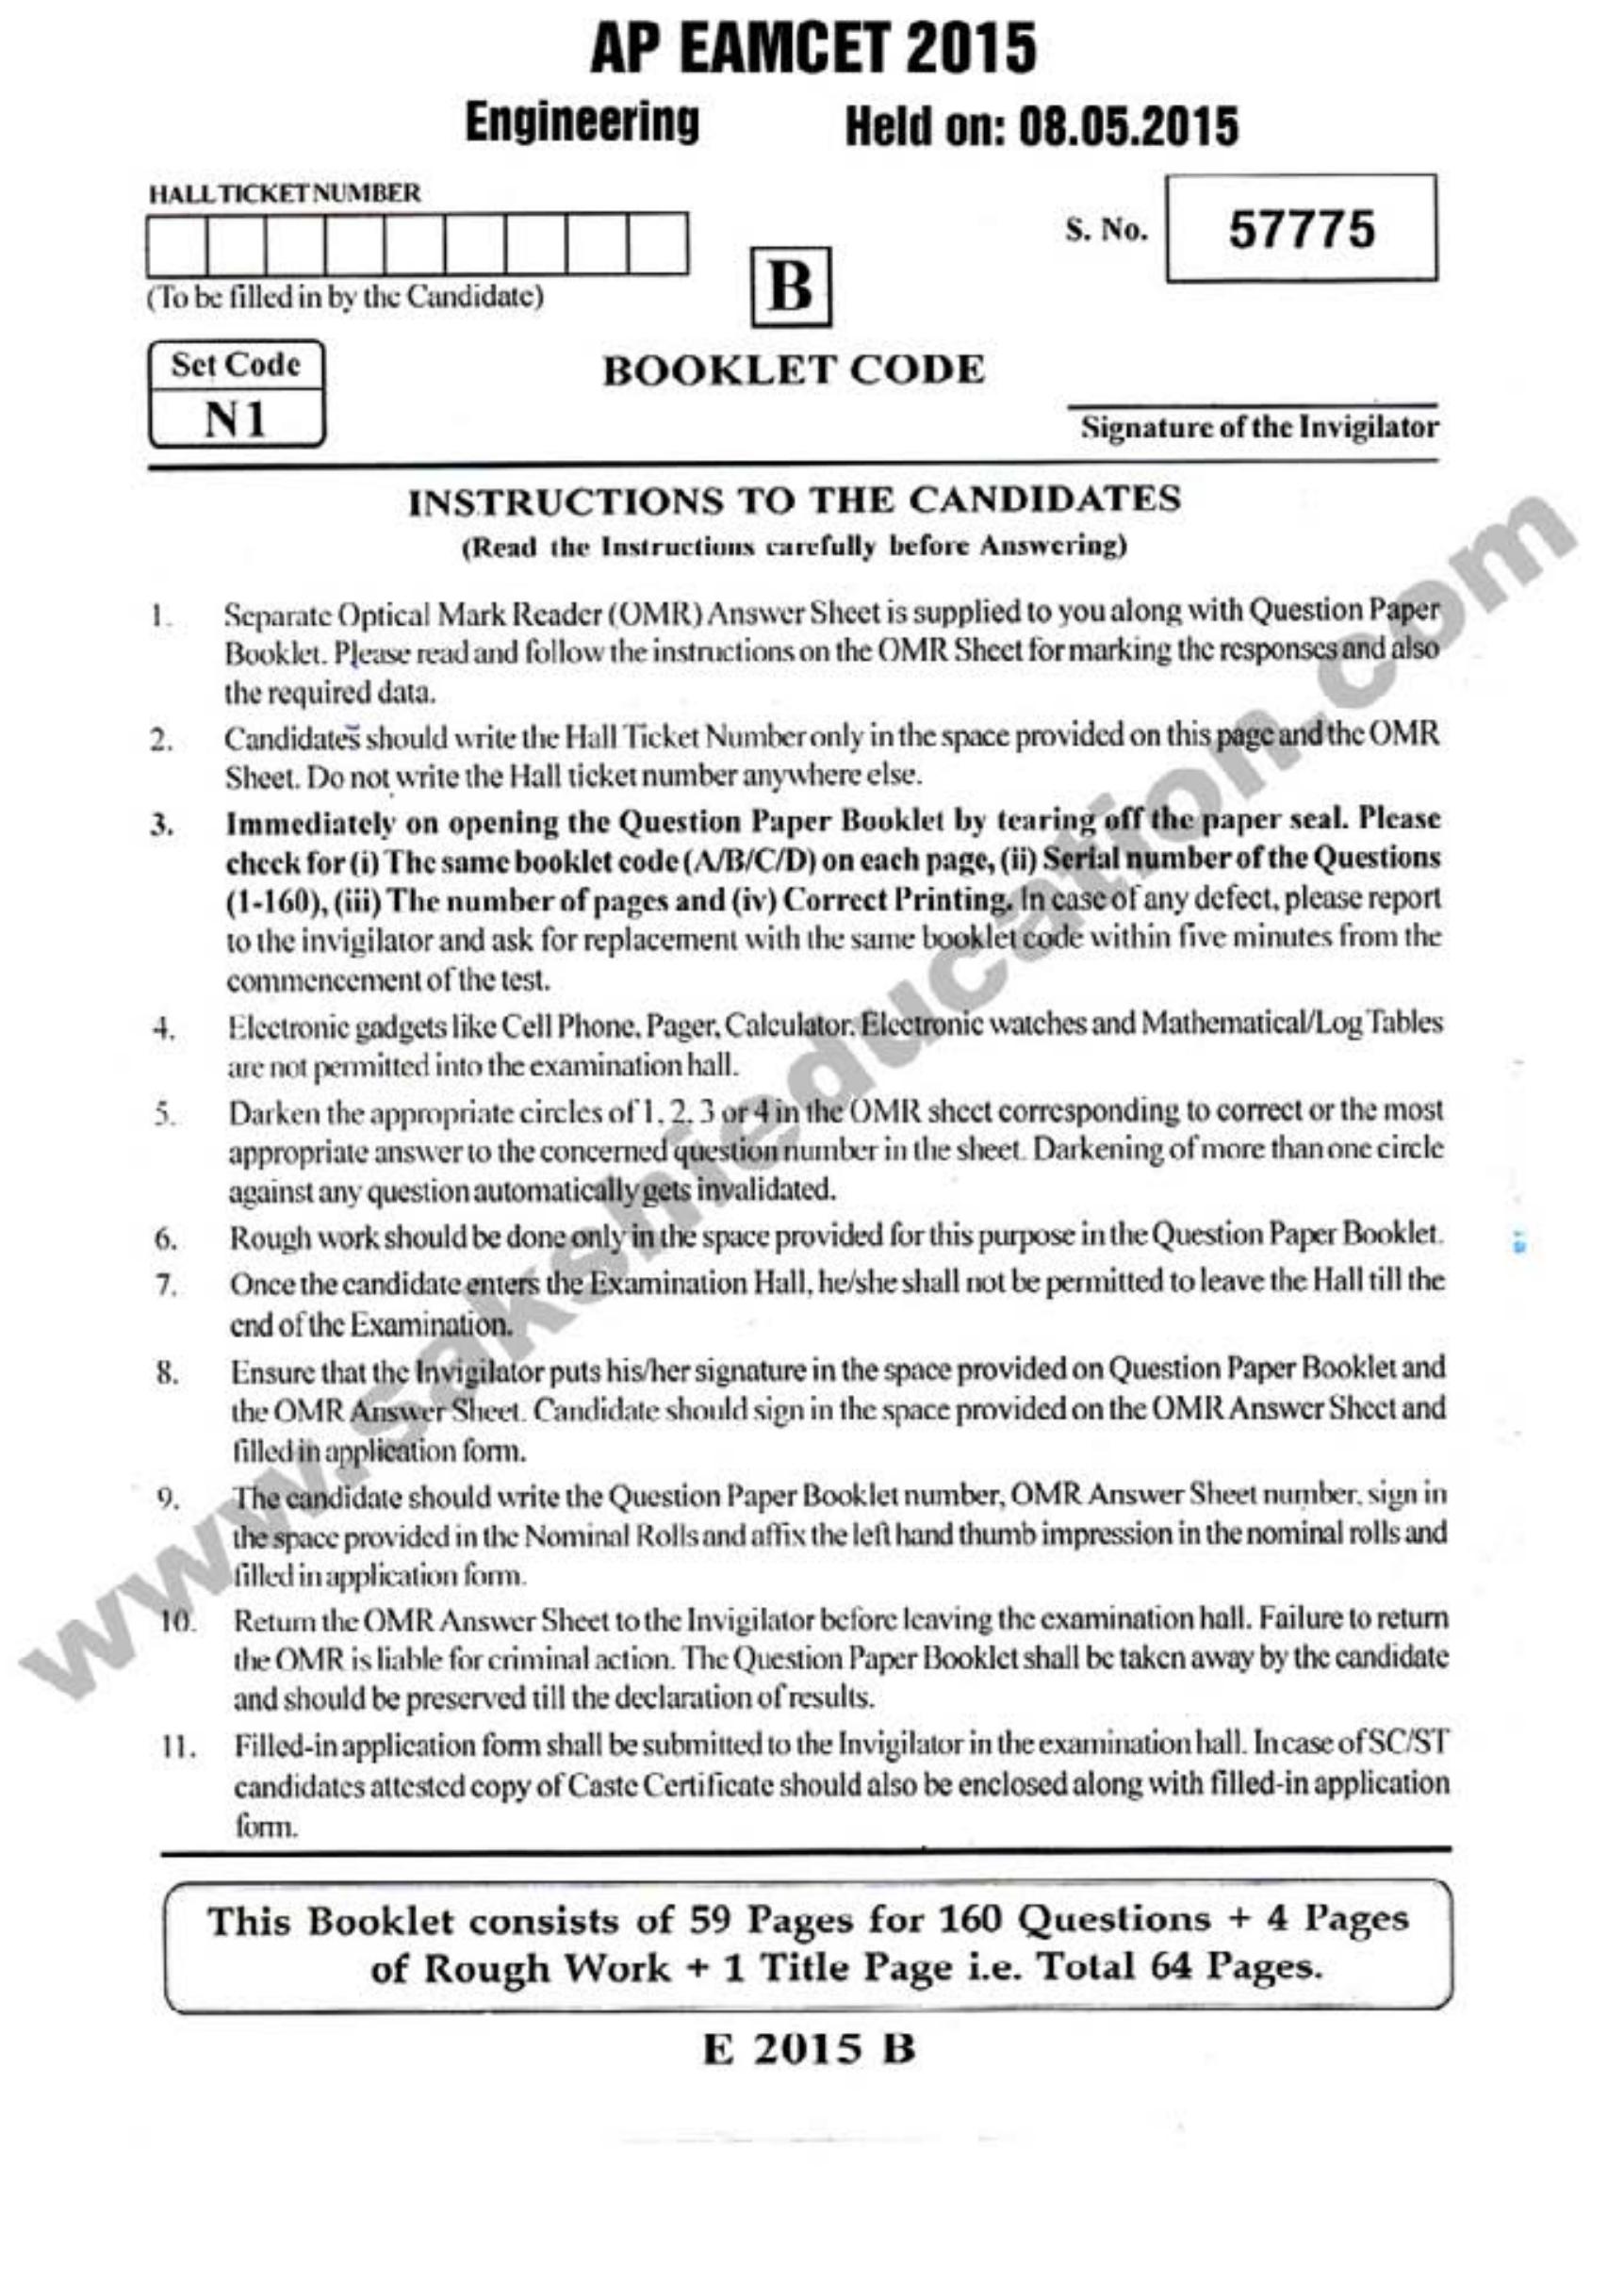 AP EAMCET 2015 Engineering Question Paper with Key - Page 1